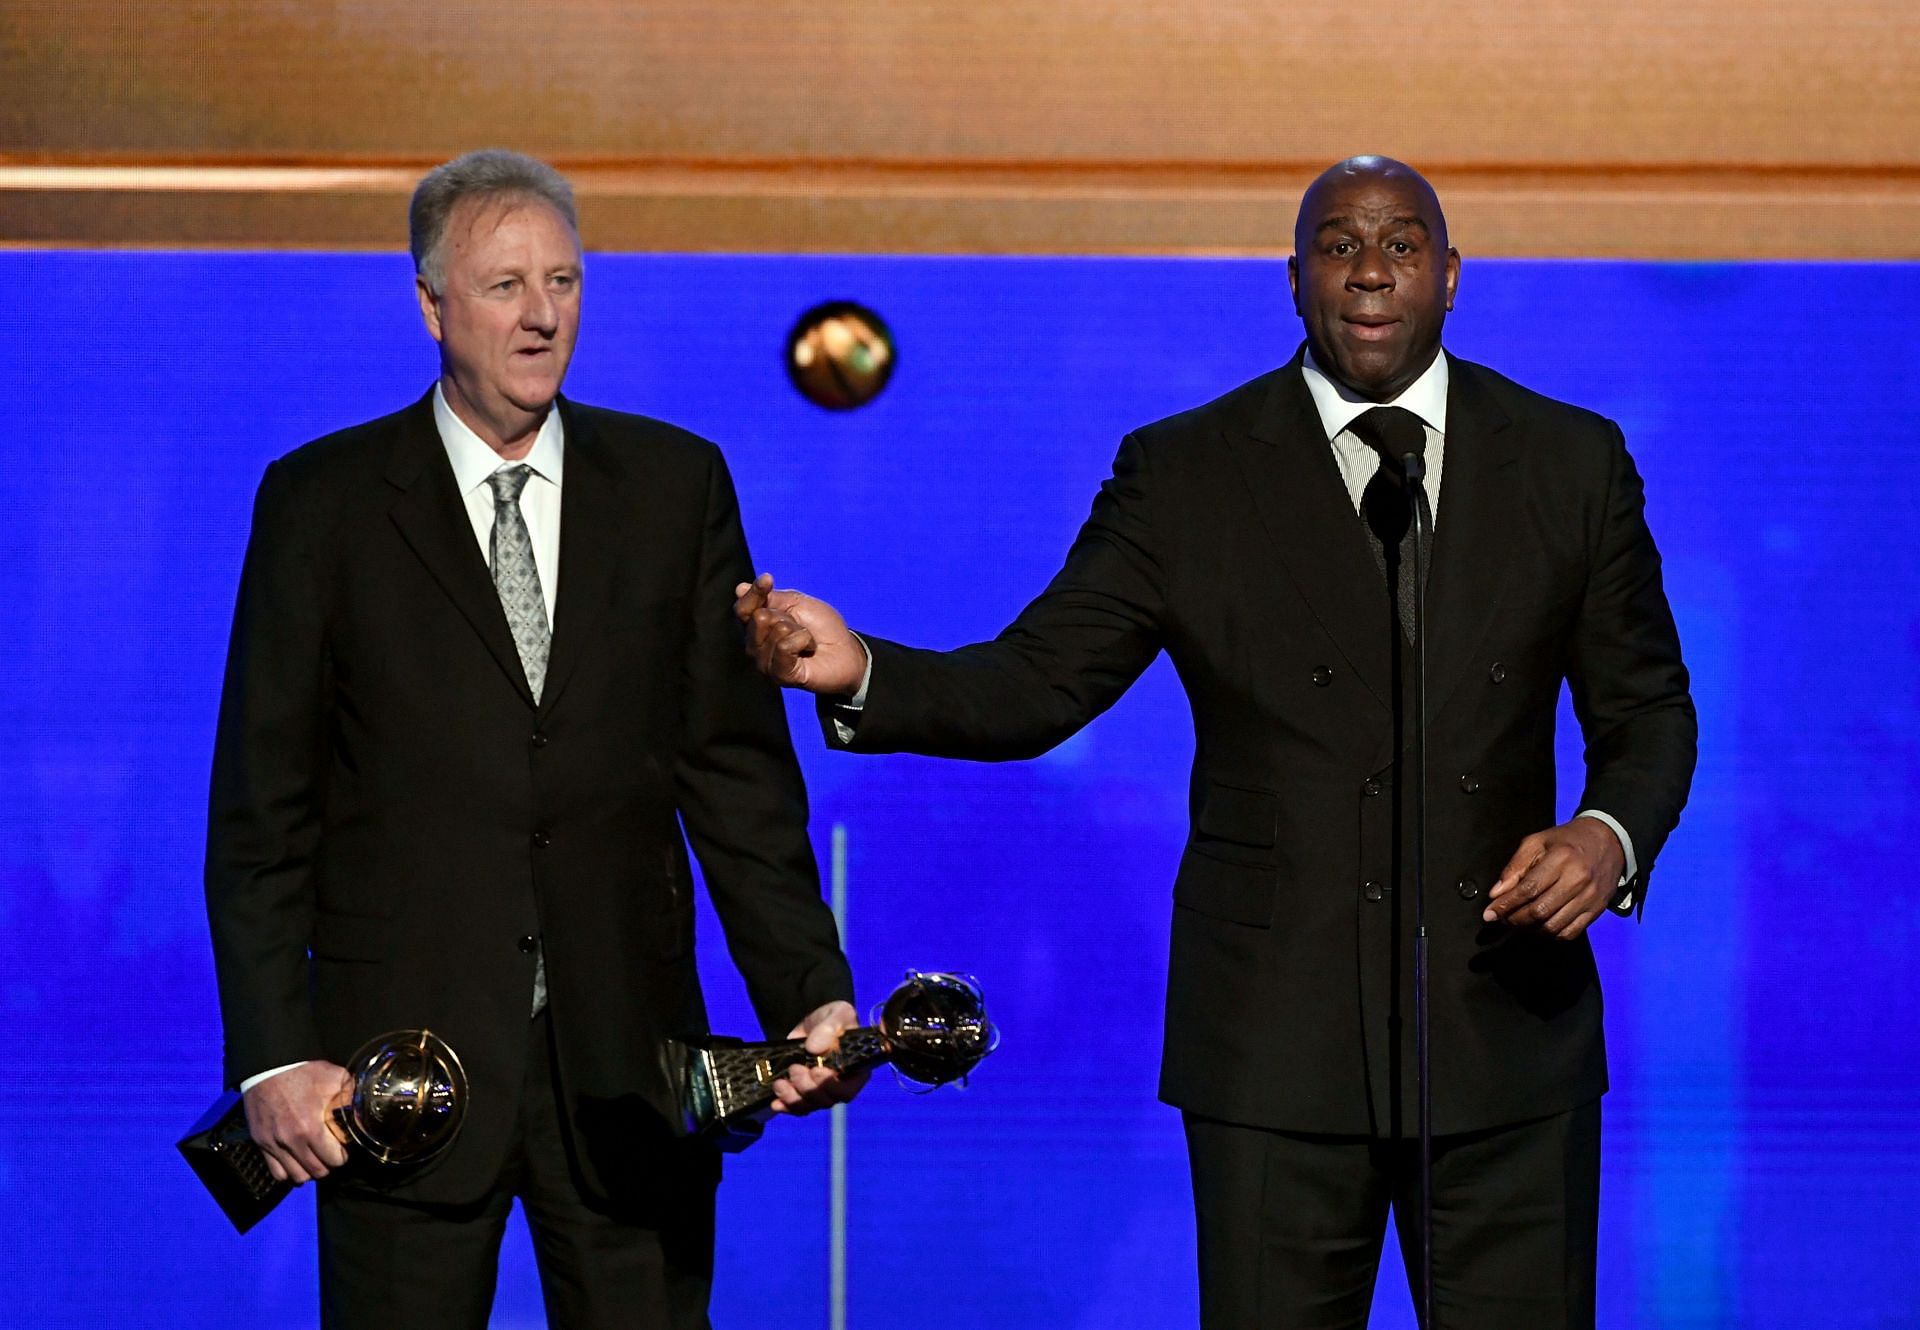 Larry Bird, left, and Magic Johnson at the 2019 NBA Awards Presented By Kia On TNT - Inside.